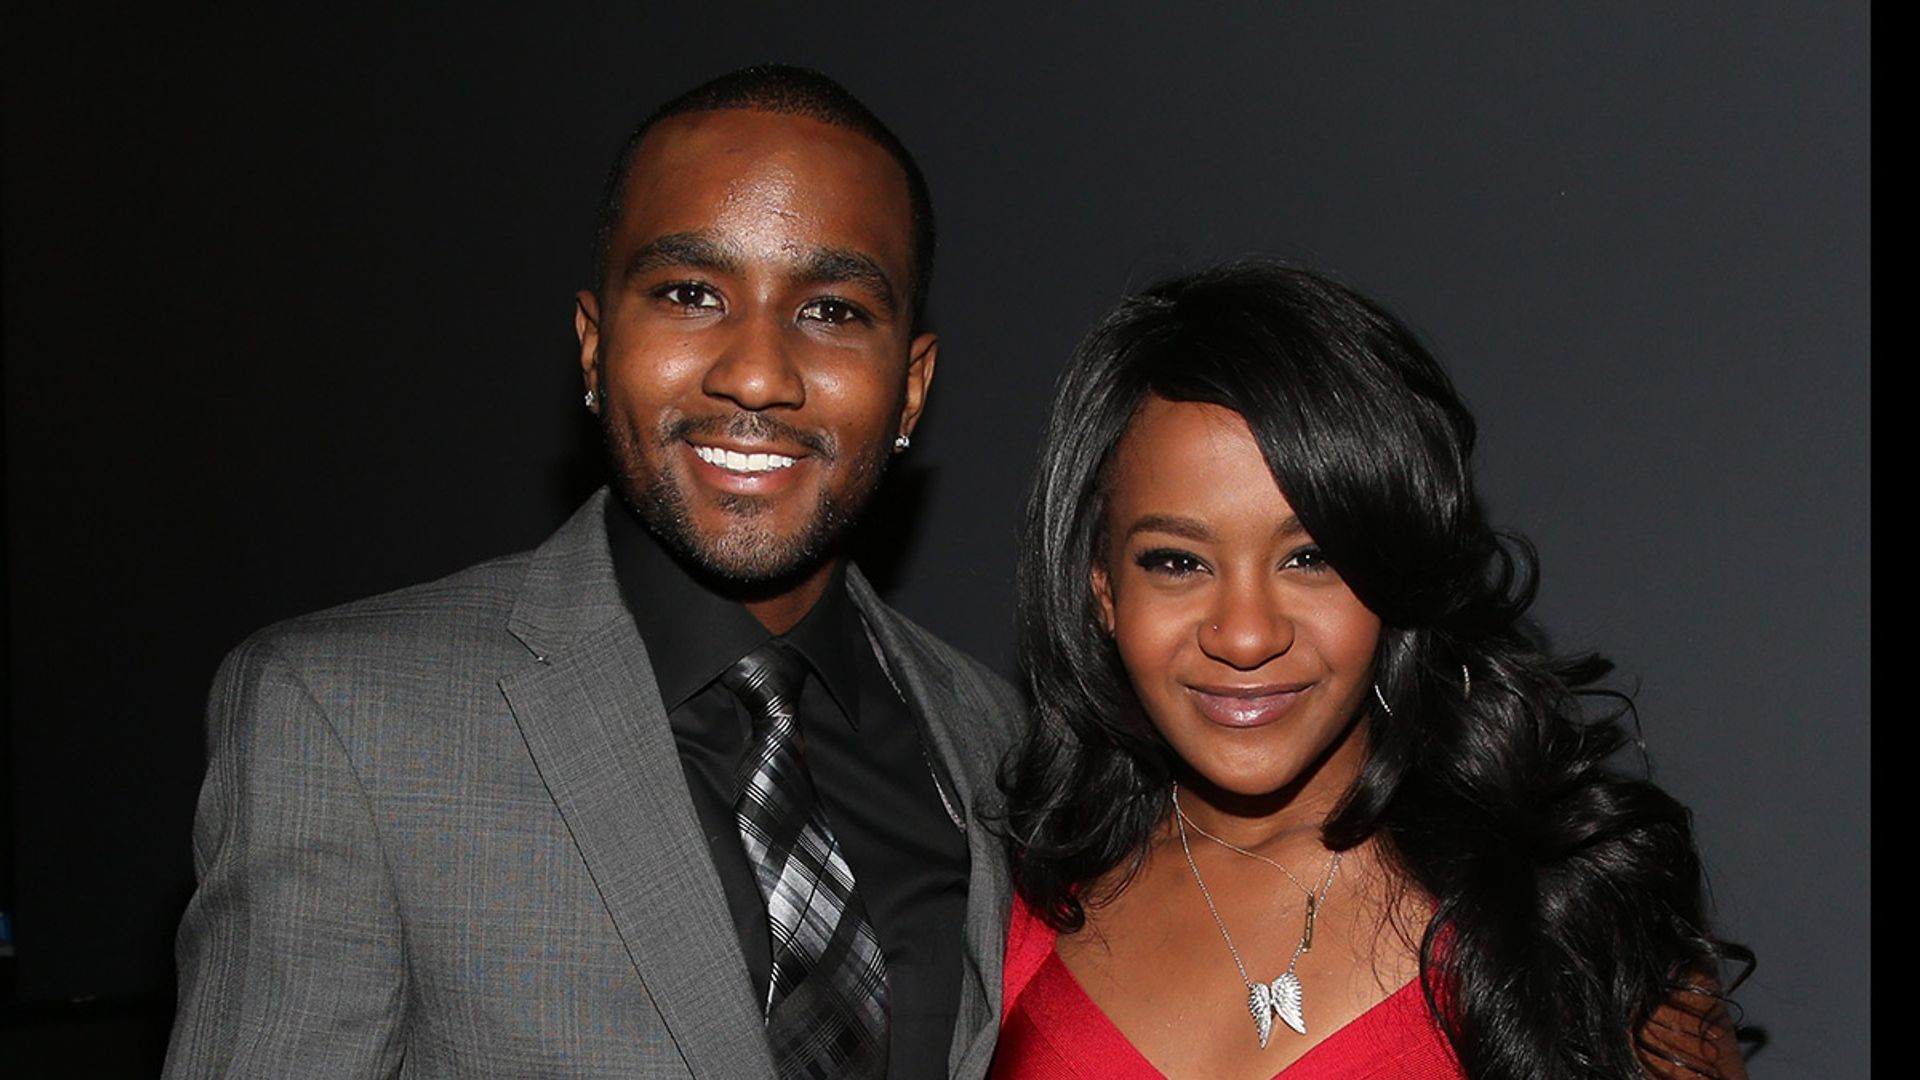 Nick Gordon, ex-boyfriend of Bobbi Kristina Brown, has died after being rushed to hospital on New Year's Eve